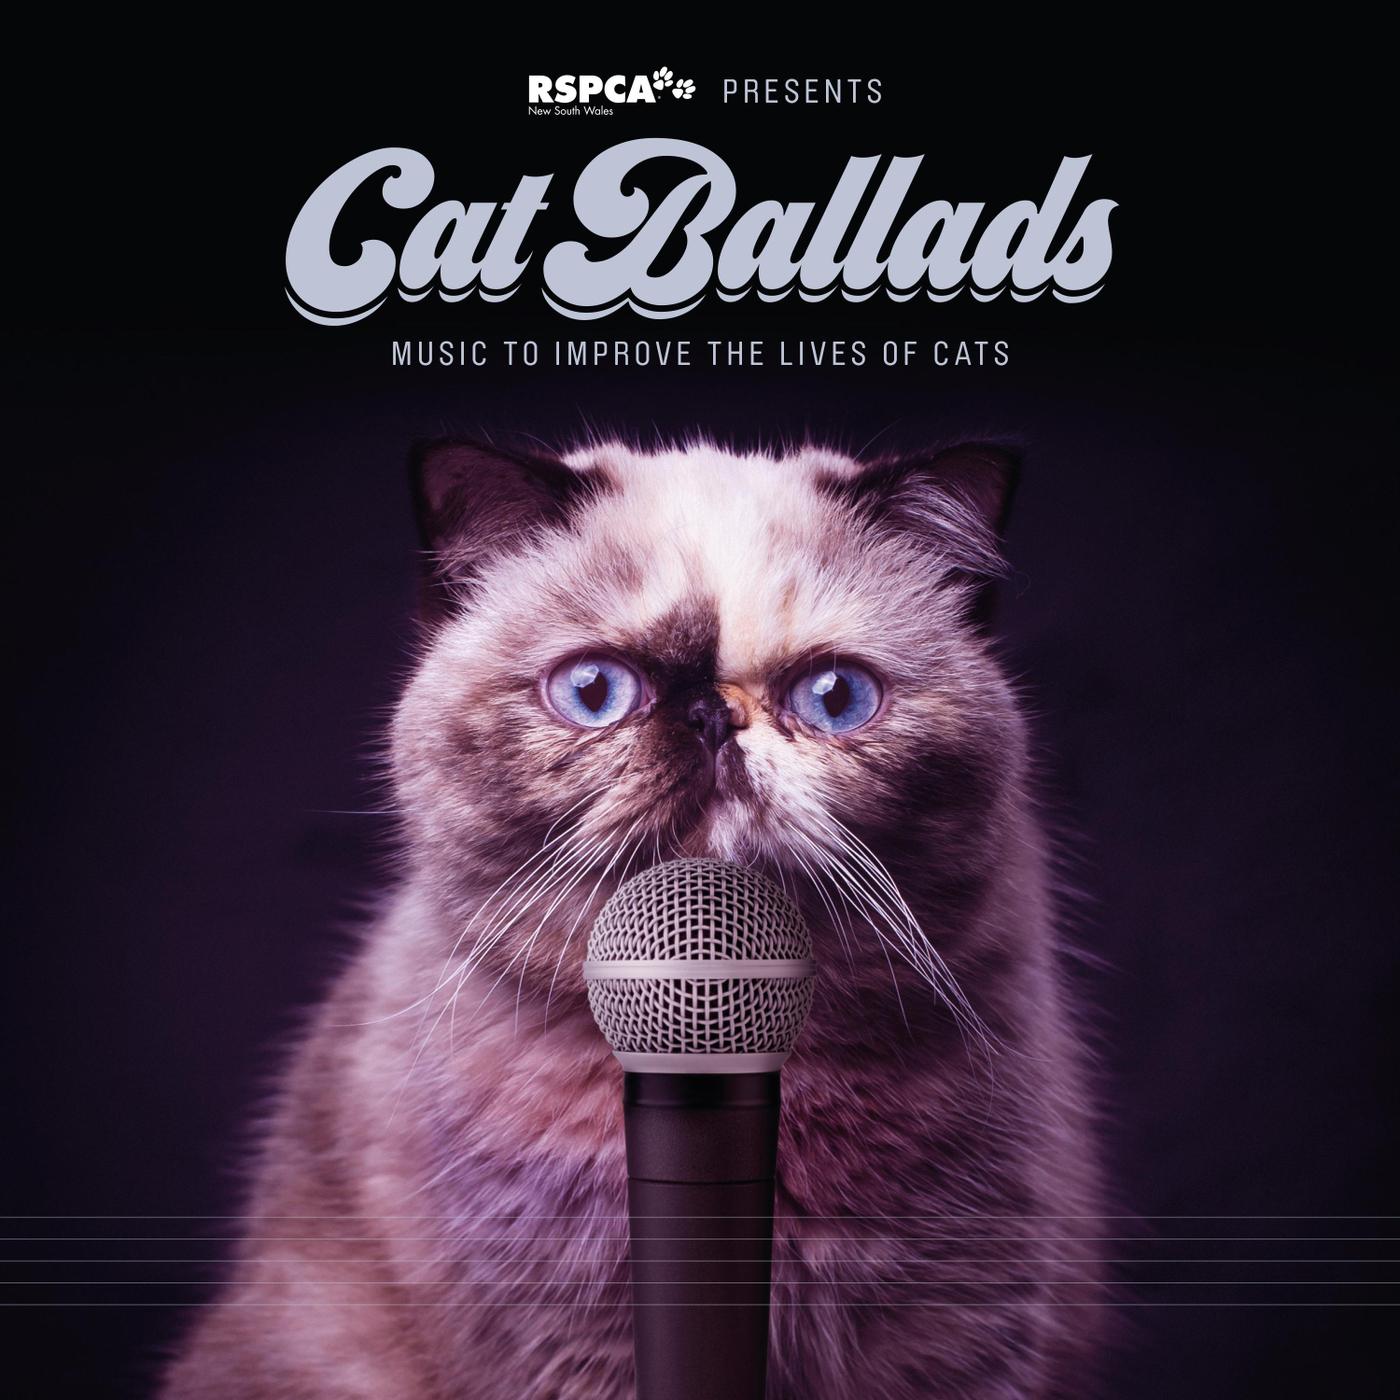 Cat Ballads: Music to Improve the Lives of Cats